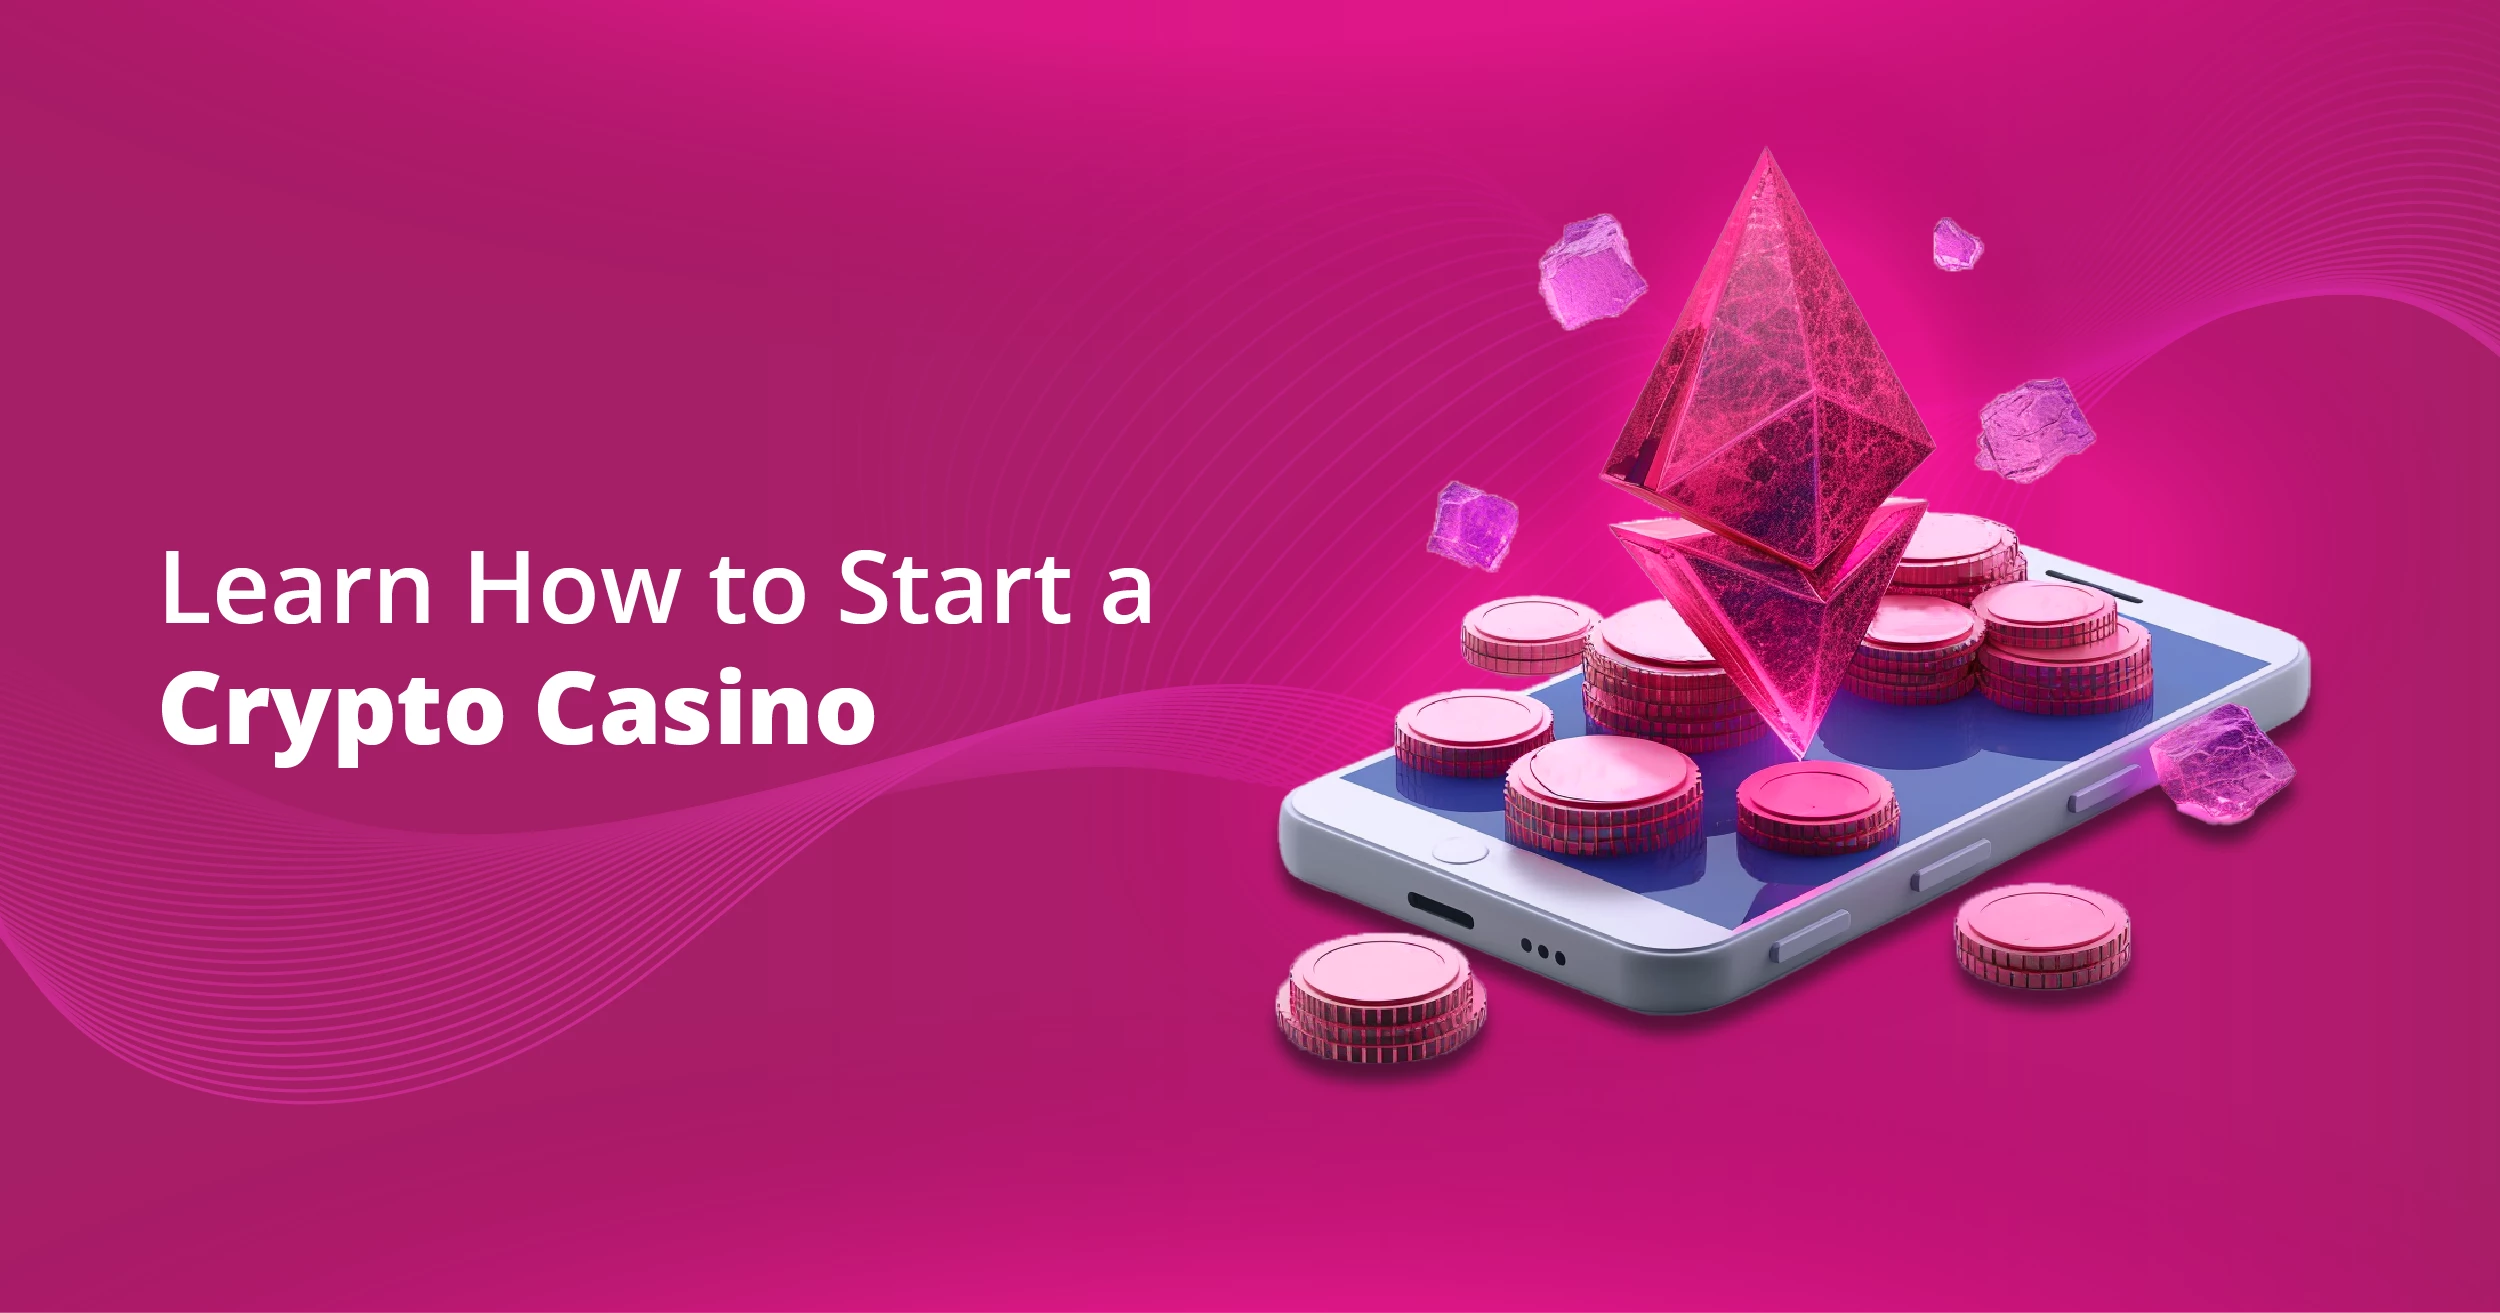 How to Start a Crypto Casino: The Ultimate Guide